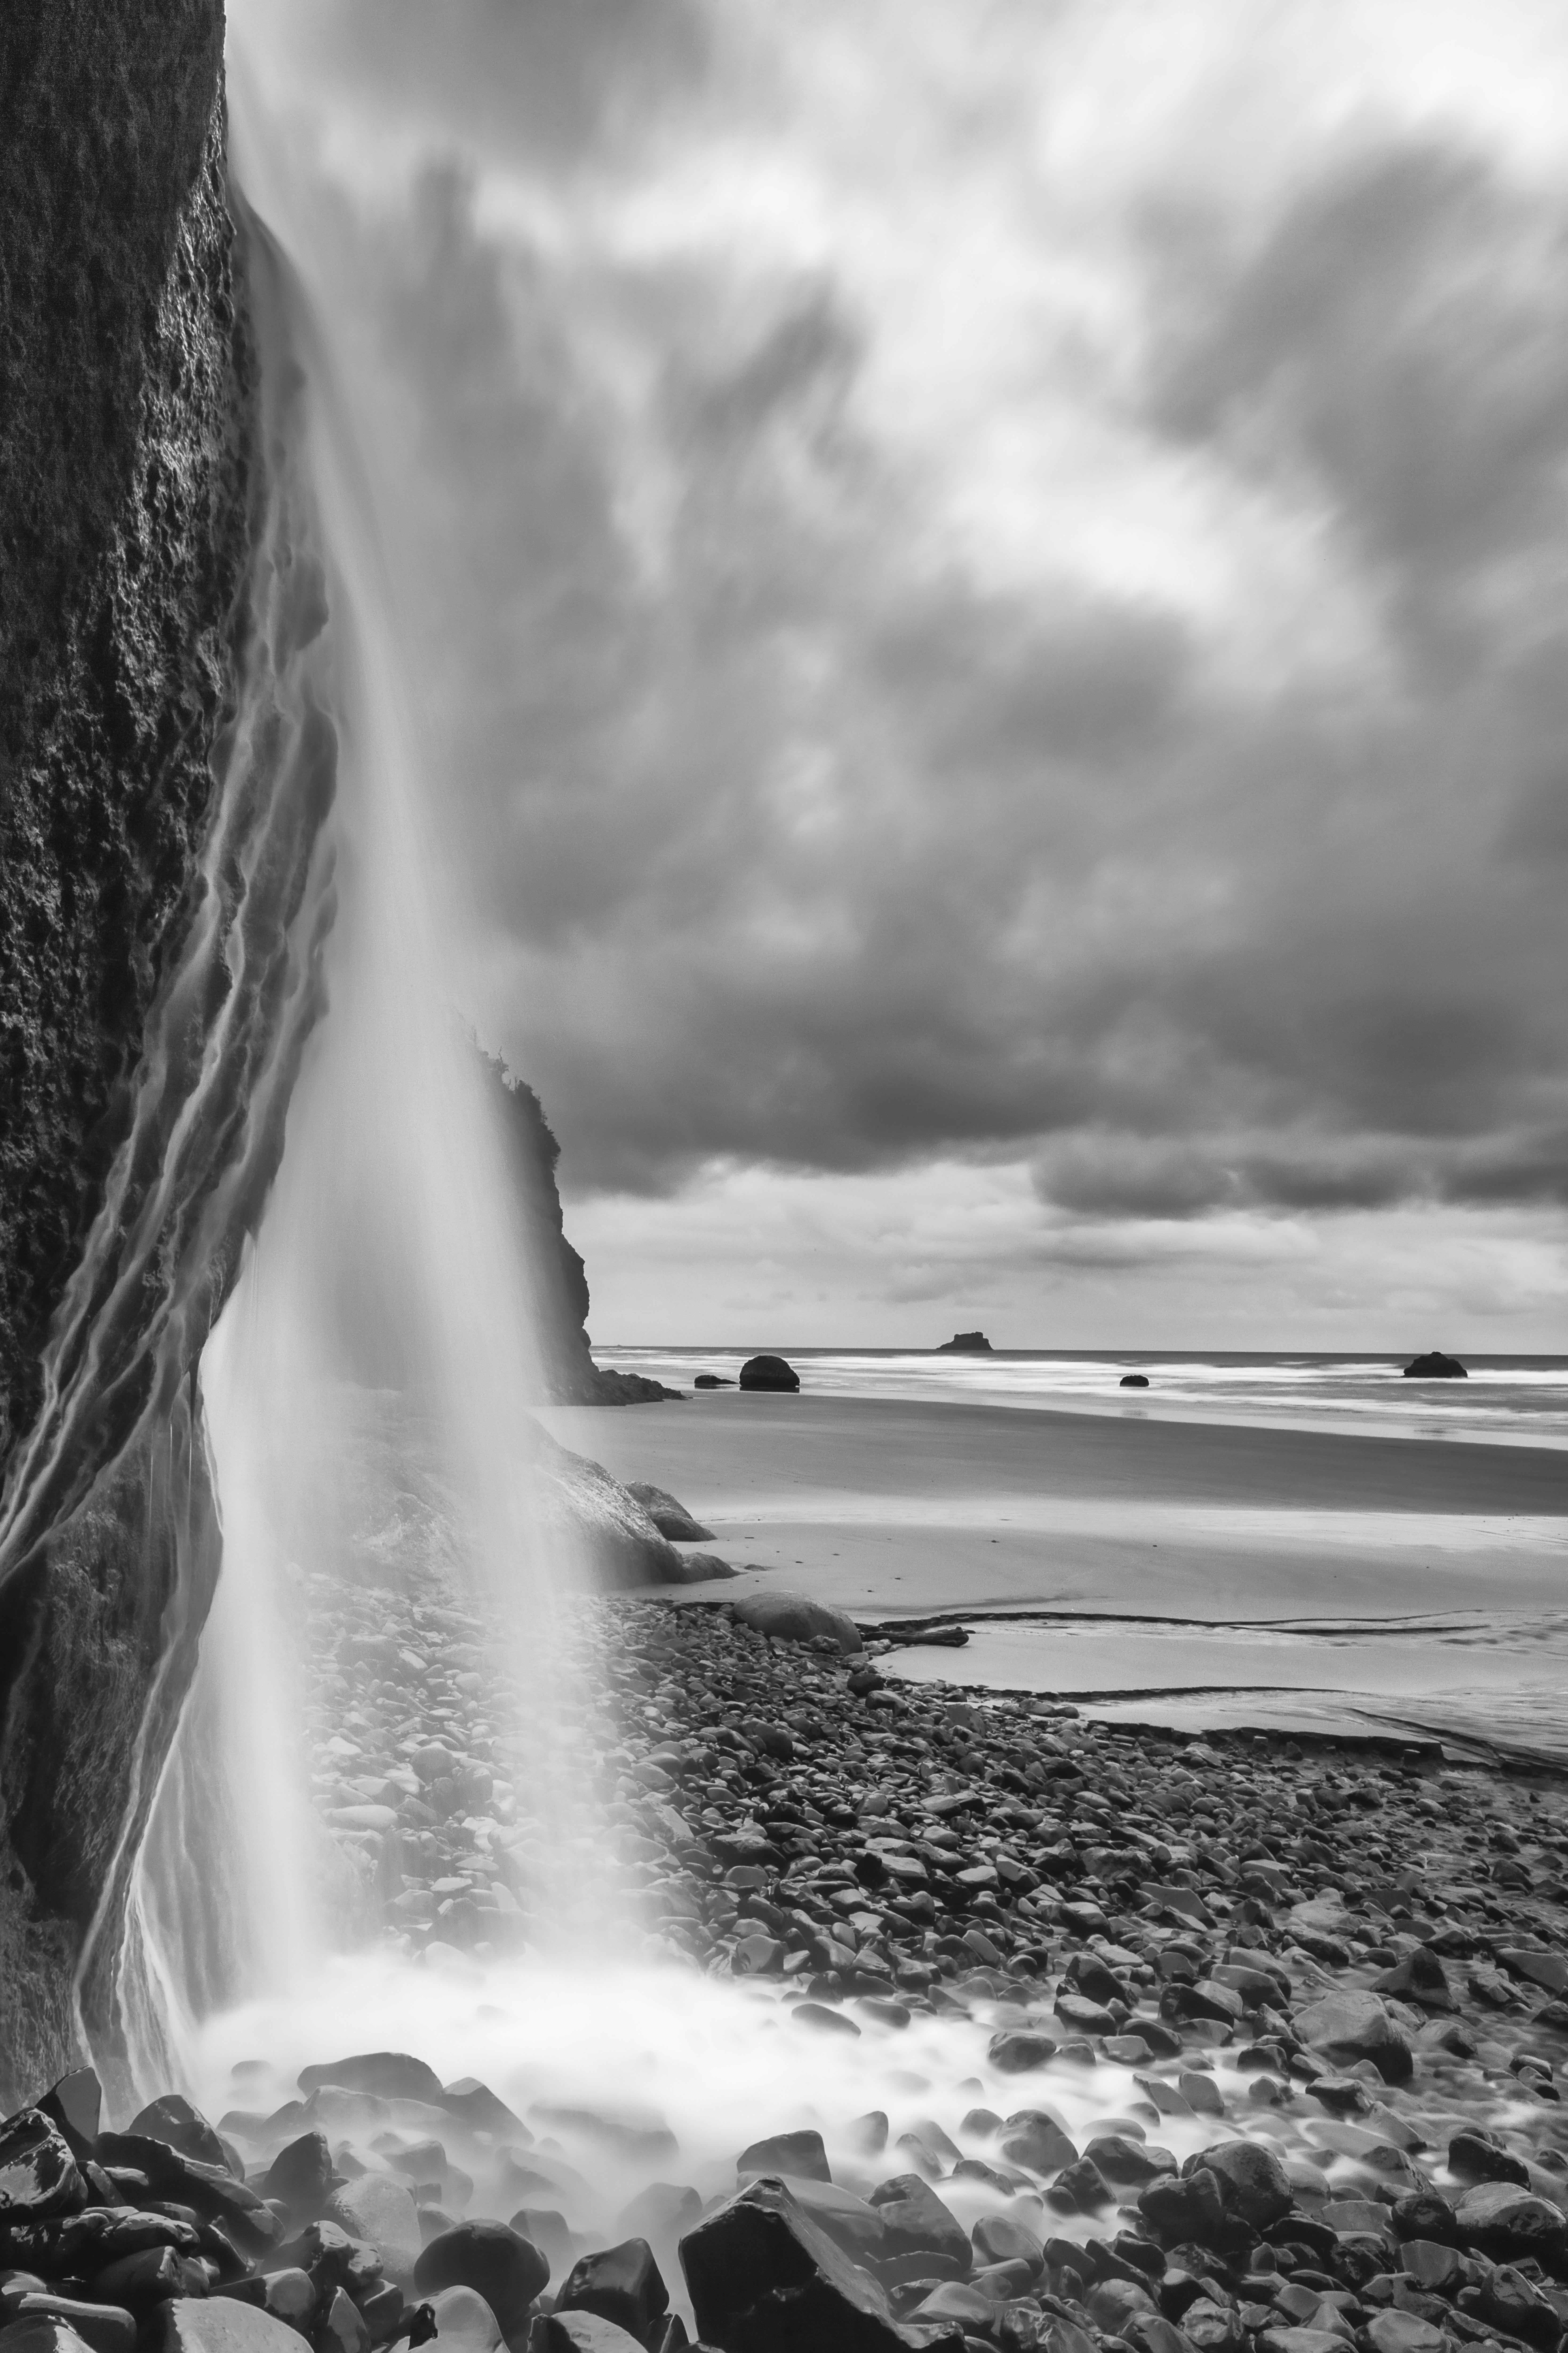 Jon Glaser, 'Falling Into The Sea', 2012, original Photography Black and White, 16 x 24  x 1 inches. Artwork description: 4287 I took this photograph in Oregon along the coastline  ...